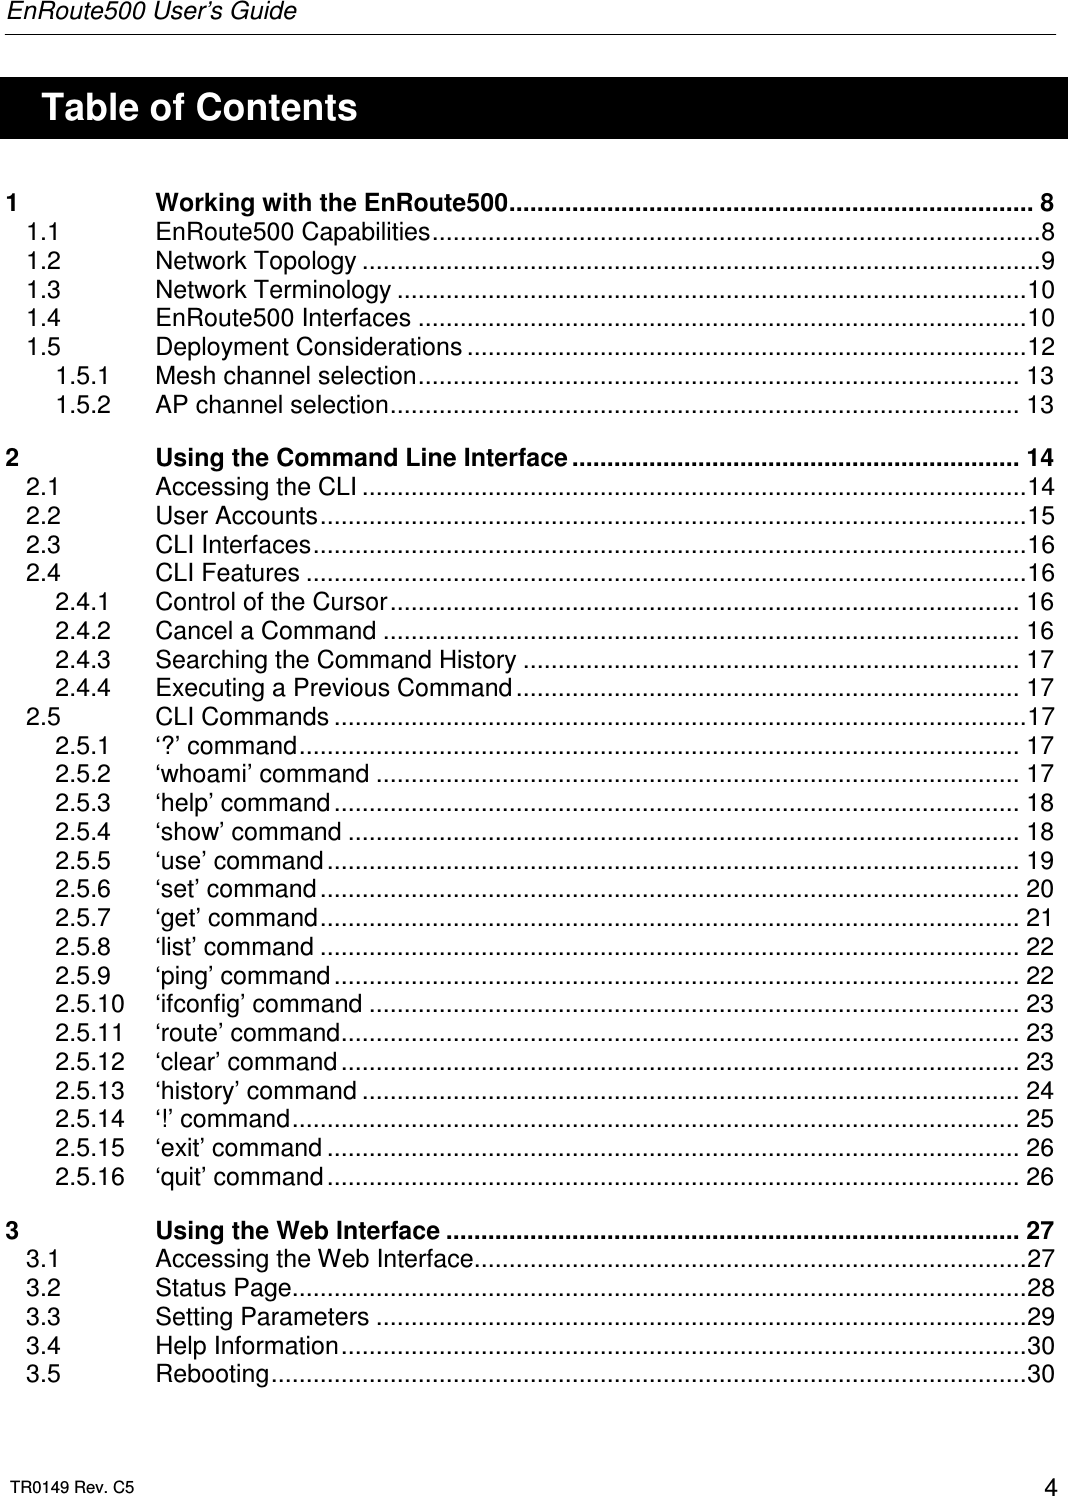 EnRoute500 User’s Guide  TR0149 Rev. C5  4    Table of Contents 1 Working with the EnRoute500........................................................................... 8 1.1 EnRoute500 Capabilities.......................................................................................8 1.2 Network Topology .................................................................................................9 1.3 Network Terminology ..........................................................................................10 1.4 EnRoute500 Interfaces .......................................................................................10 1.5 Deployment Considerations ................................................................................12 1.5.1 Mesh channel selection...................................................................................... 13 1.5.2 AP channel selection.......................................................................................... 13 2 Using the Command Line Interface ................................................................ 14 2.1 Accessing the CLI ...............................................................................................14 2.2 User Accounts.....................................................................................................15 2.3 CLI Interfaces......................................................................................................16 2.4 CLI Features .......................................................................................................16 2.4.1 Control of the Cursor.......................................................................................... 16 2.4.2 Cancel a Command ........................................................................................... 16 2.4.3 Searching the Command History ....................................................................... 17 2.4.4 Executing a Previous Command ........................................................................ 17 2.5 CLI Commands ...................................................................................................17 2.5.1 ‘?’ command....................................................................................................... 17 2.5.2 ‘whoami’ command ............................................................................................ 17 2.5.3 ‘help’ command .................................................................................................. 18 2.5.4 ‘show’ command ................................................................................................ 18 2.5.5 ‘use’ command................................................................................................... 19 2.5.6 ‘set’ command .................................................................................................... 20 2.5.7 ‘get’ command.................................................................................................... 21 2.5.8 ‘list’ command .................................................................................................... 22 2.5.9 ‘ping’ command .................................................................................................. 22 2.5.10 ‘ifconfig’ command ............................................................................................. 23 2.5.11 ‘route’ command................................................................................................. 23 2.5.12 ‘clear’ command ................................................................................................. 23 2.5.13 ‘history’ command .............................................................................................. 24 2.5.14 ‘!’ command........................................................................................................ 25 2.5.15 ‘exit’ command ................................................................................................... 26 2.5.16 ‘quit’ command................................................................................................... 26 3 Using the Web Interface .................................................................................. 27 3.1 Accessing the Web Interface...............................................................................27 3.2 Status Page.........................................................................................................28 3.3 Setting Parameters .............................................................................................29 3.4 Help Information..................................................................................................30 3.5 Rebooting............................................................................................................30 